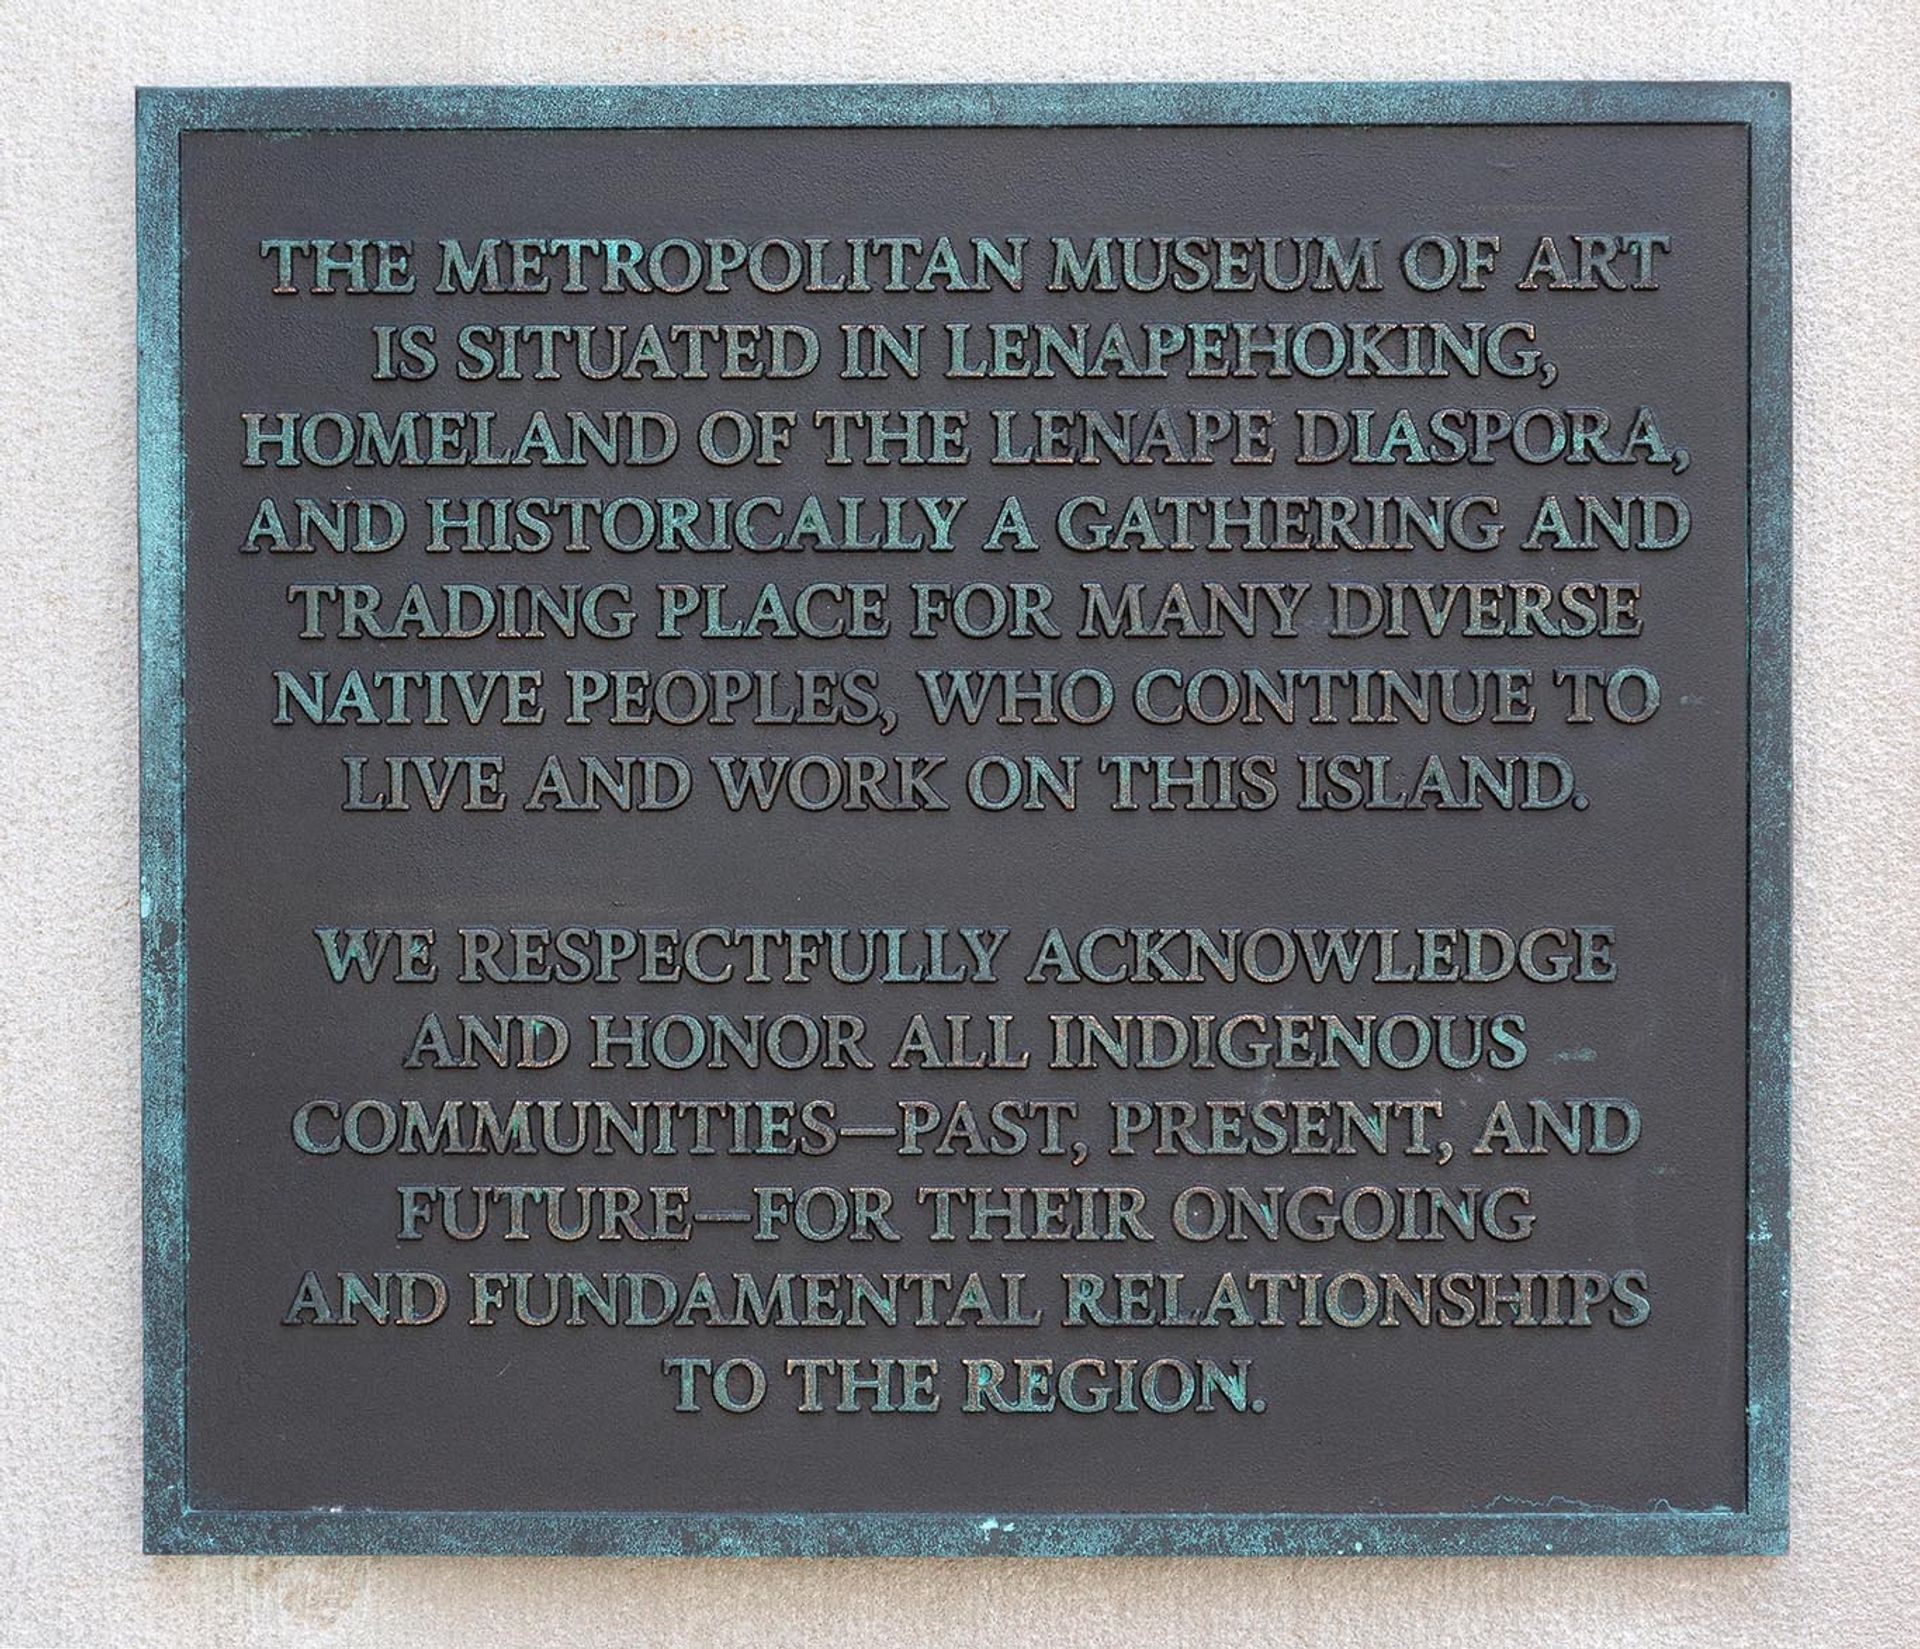 A plaque posted on the façade  of the Metropolitan Museum of Art acknowledging the history of the Lenape people on the institution's current site Photo by Bruce Schwarz; courtesy of the Metropolitan Museum of Art